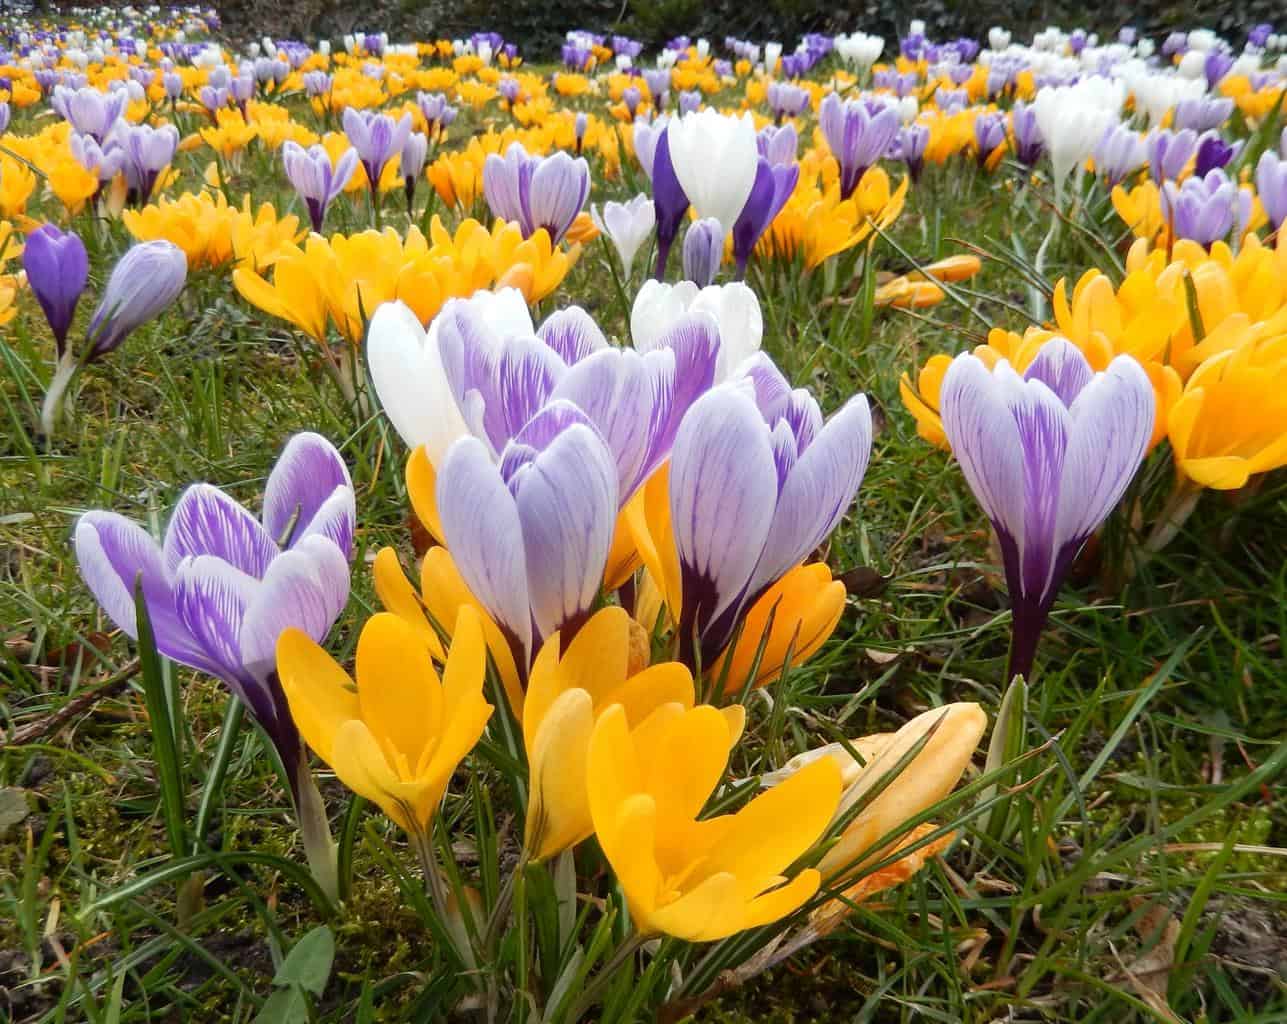 Crocus meaning and symbolism